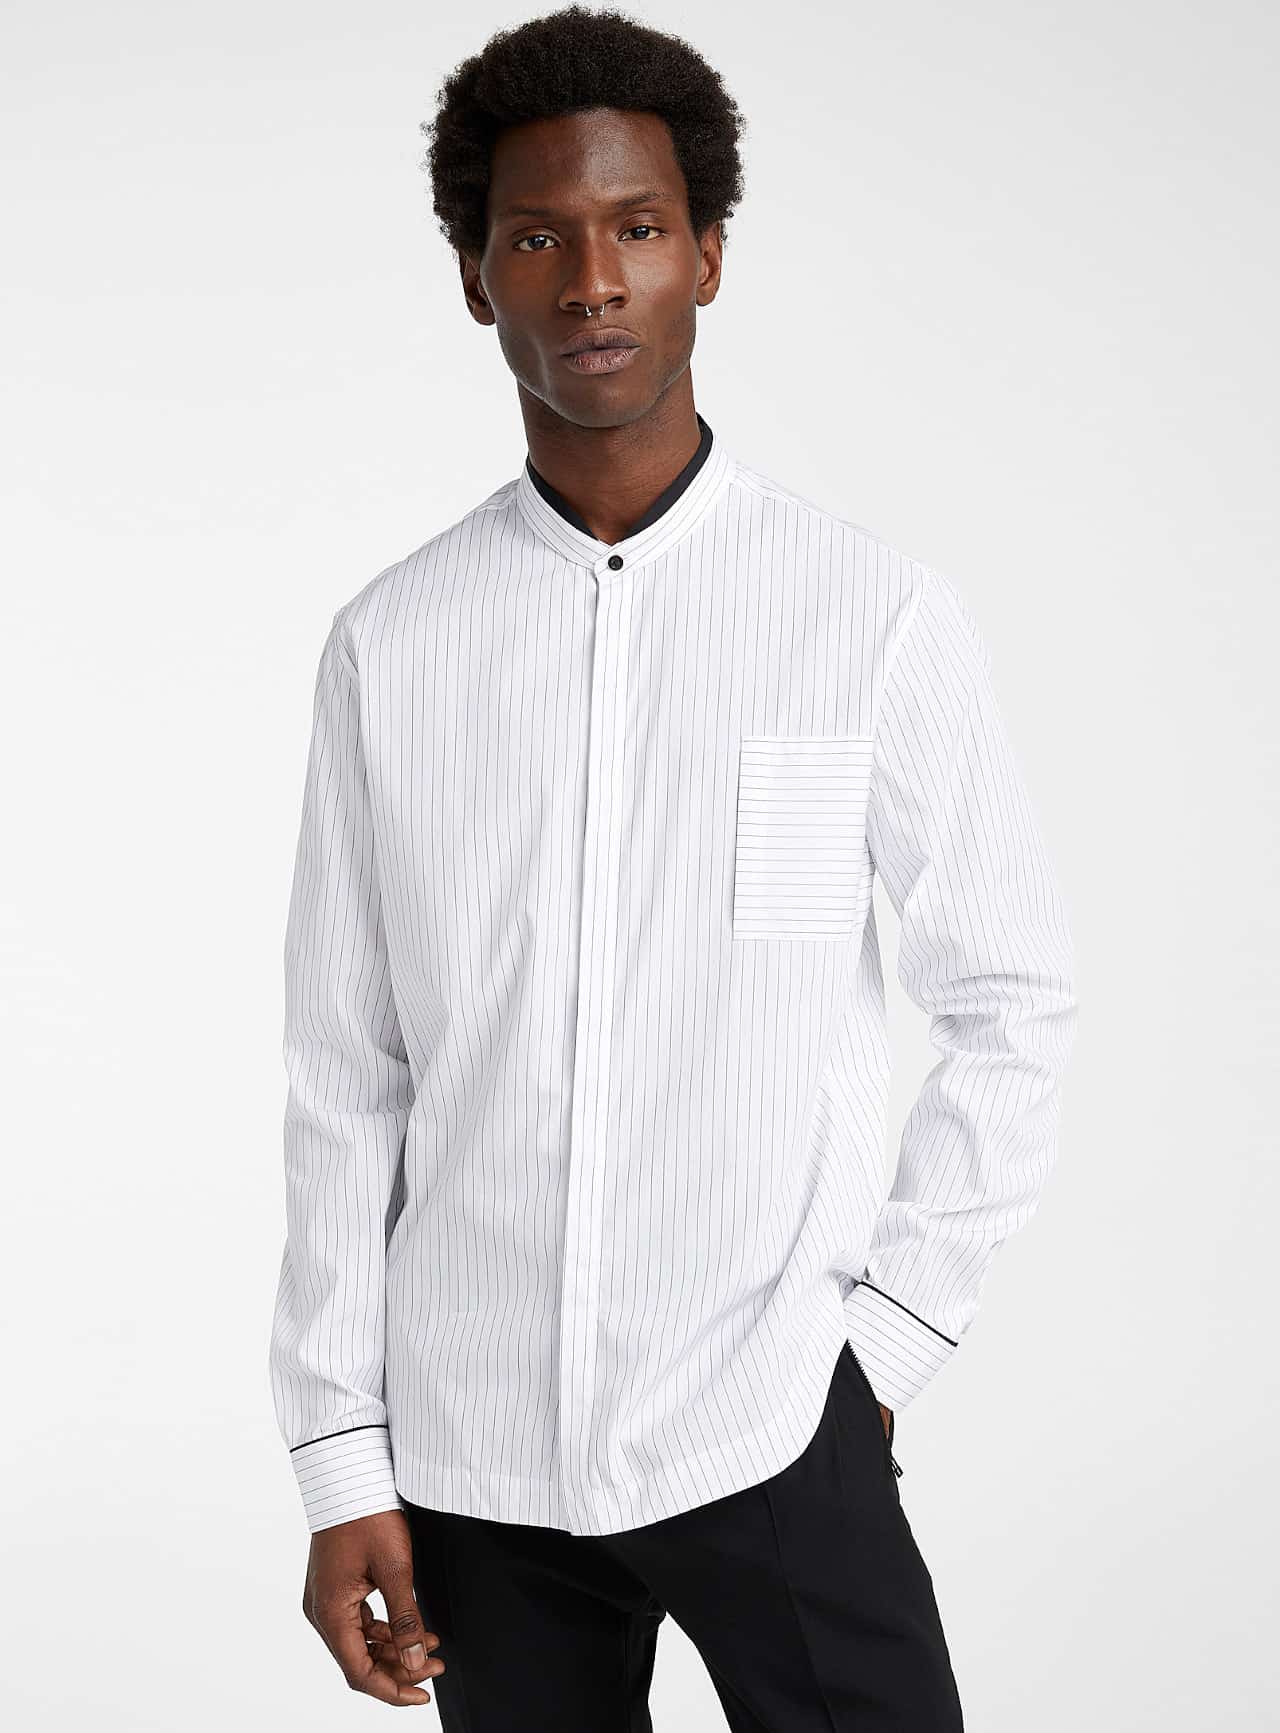 Image of male model striped shirt